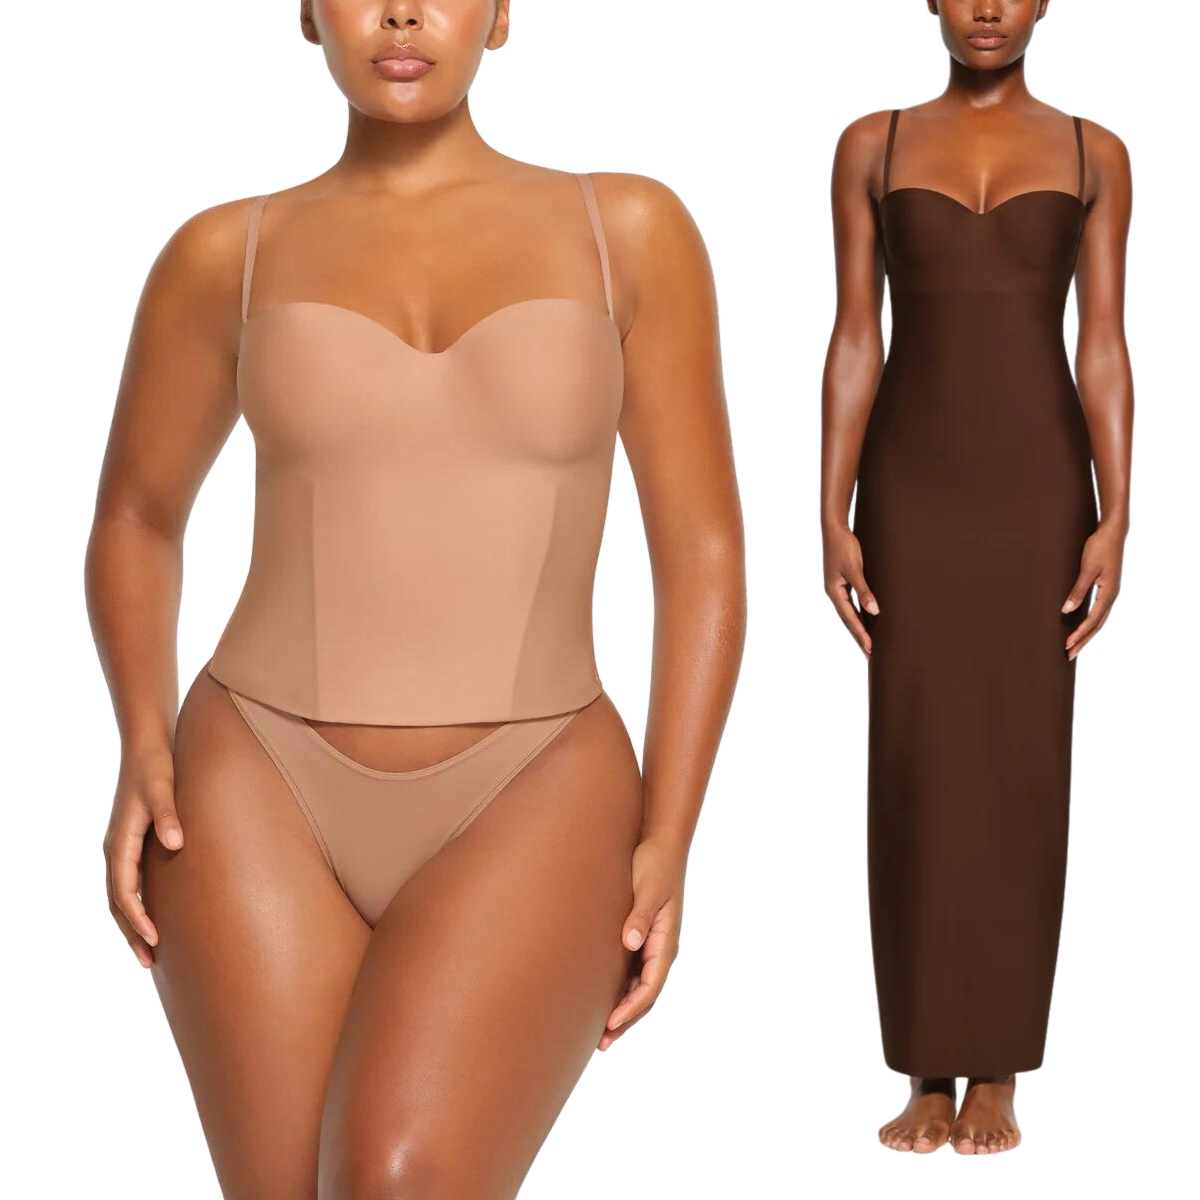 SKIMS - This is the shapewear that changed the industry. Our best